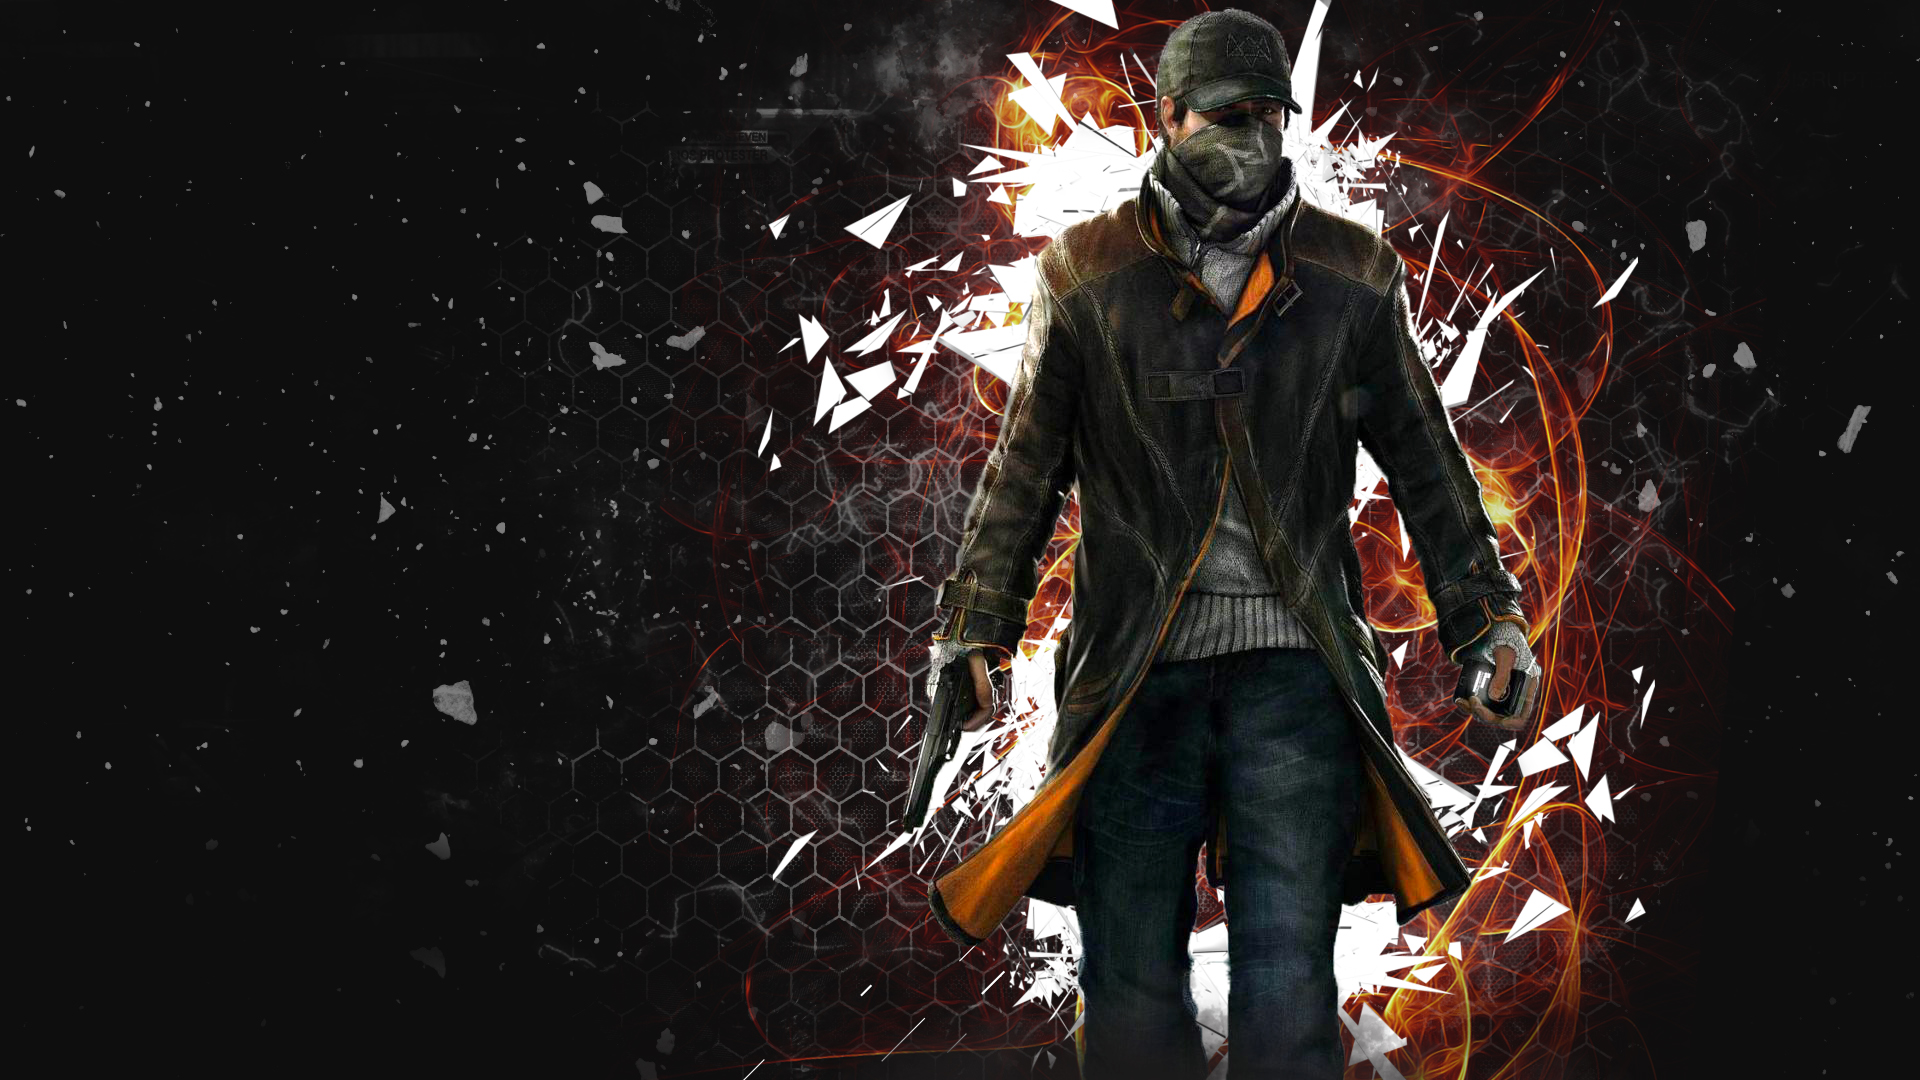 Watch Dogs Wallpapers For Mobile - HD Wallpaper 